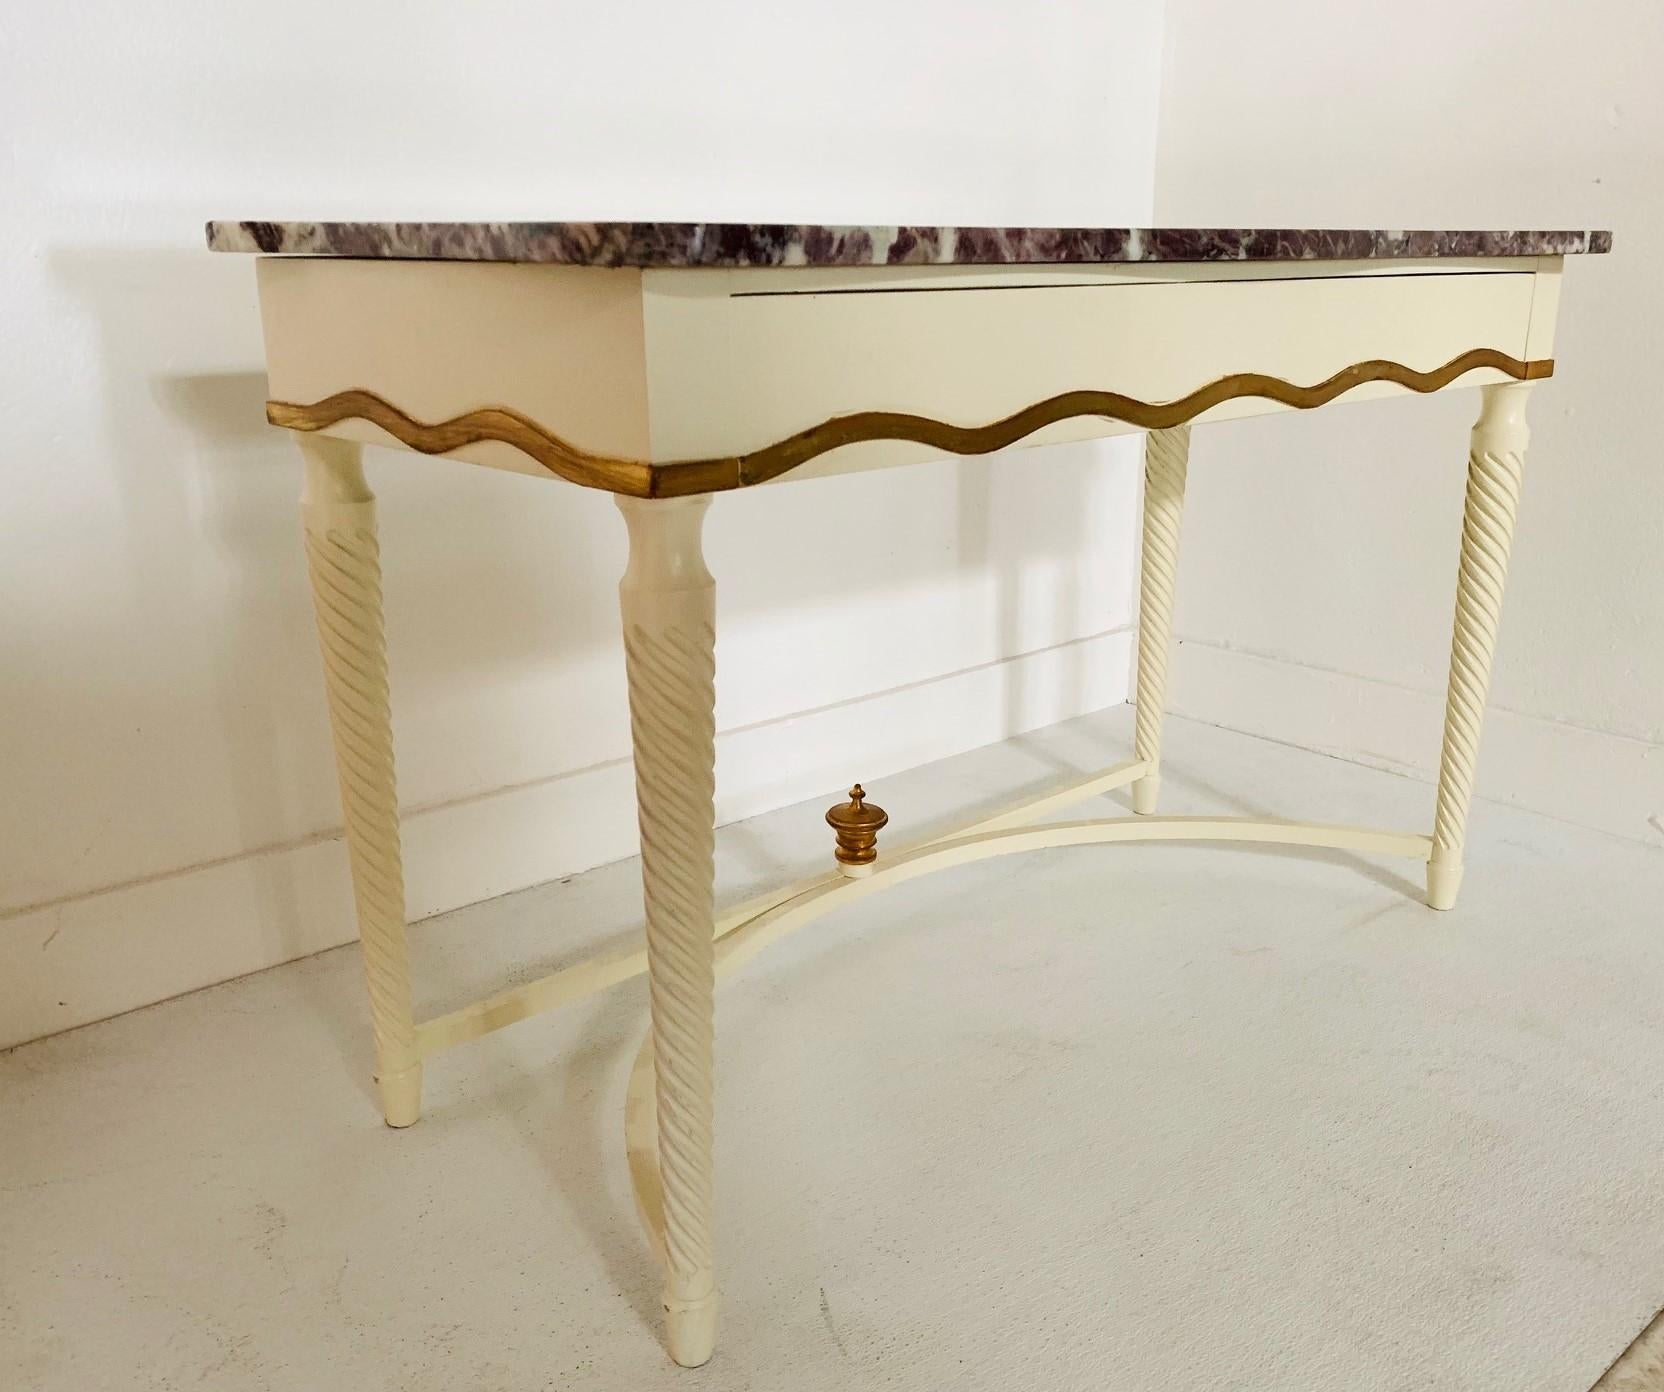 Hollywood Regency marble-top console. Console is wood with a white lacquered finish. Has a pull-out drawer with gold trim and a gold finial.